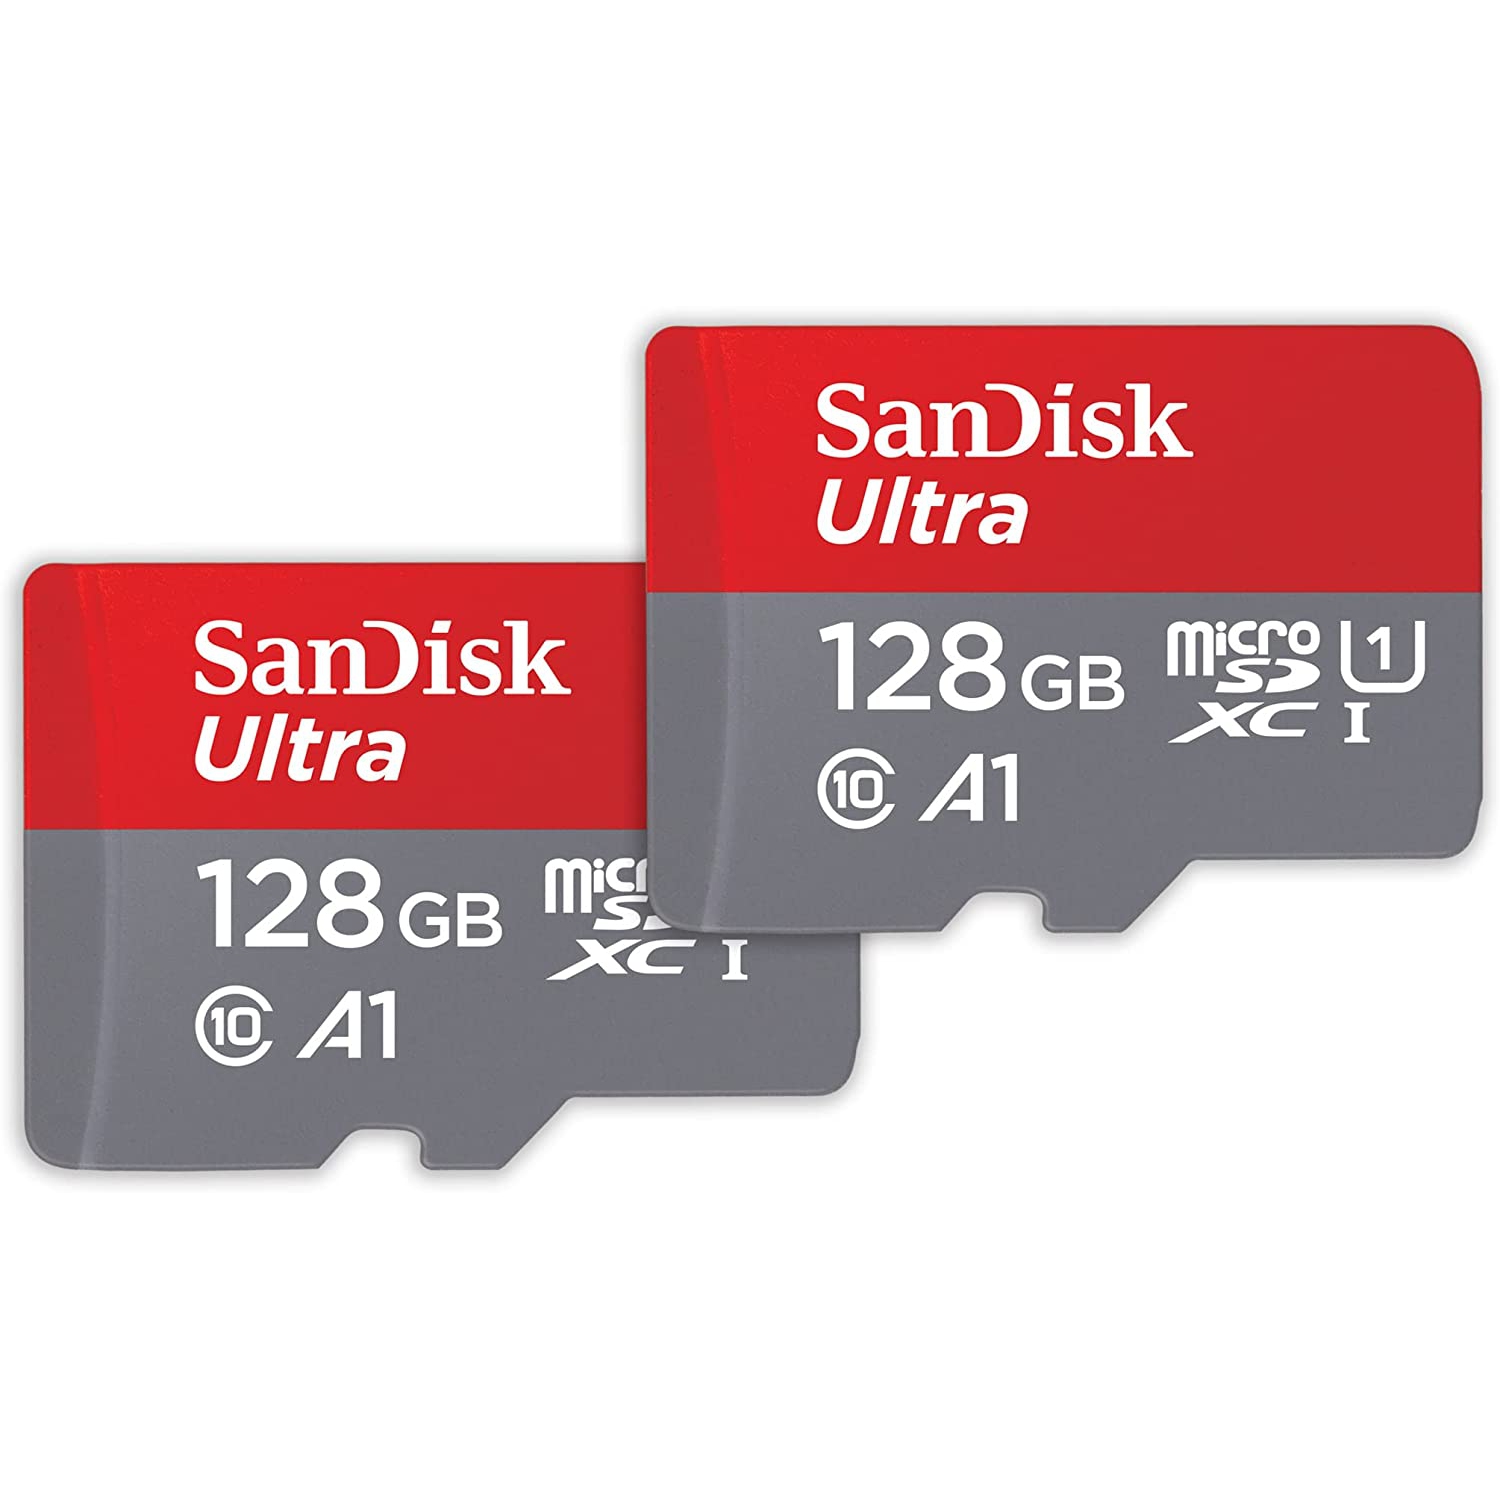 2-pack SanDisk 128GB Ultra Micro SDXC Memory Card - (SDSQUAB-128G-GN6MT) + Adapter